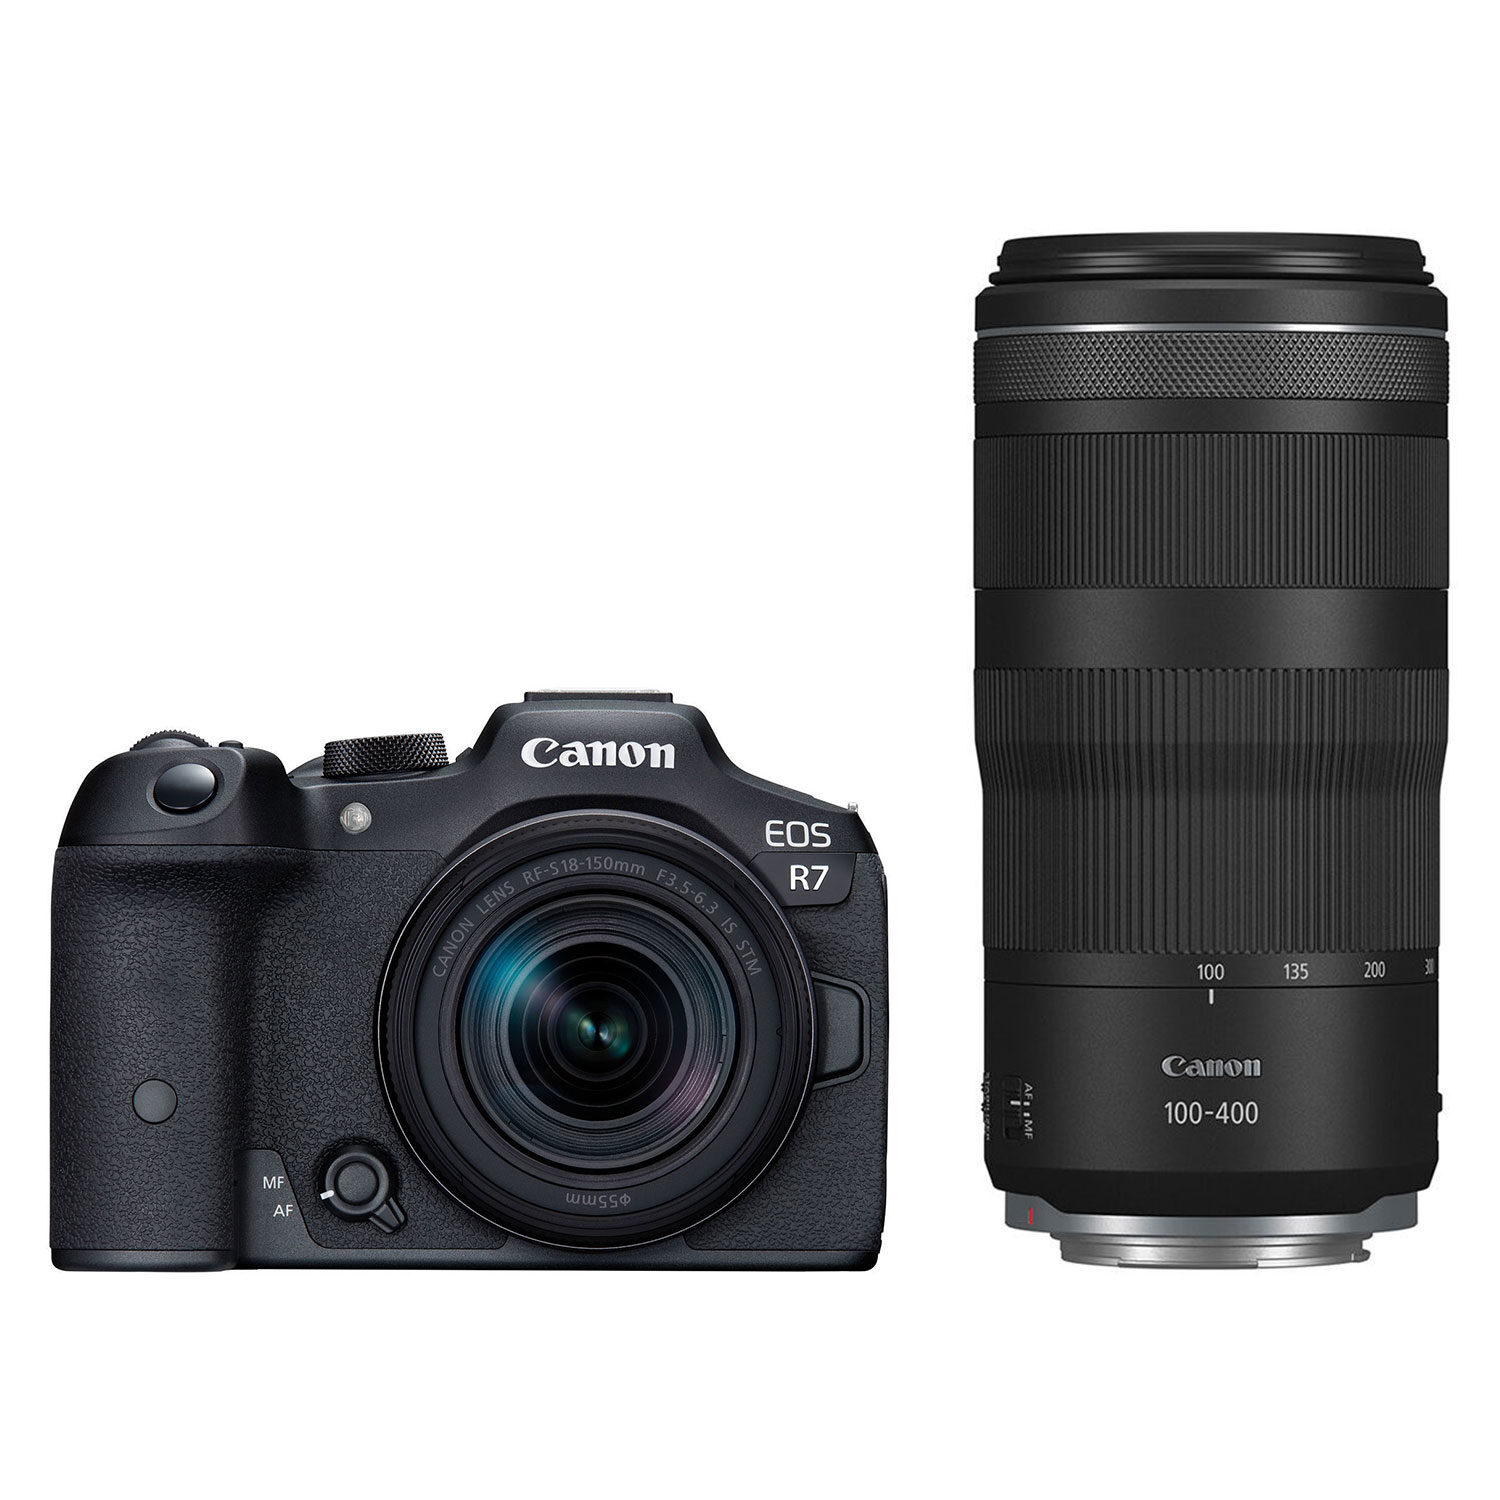 Canon Canon EOS R7 systeemcamera Zwart + RF-S 18-150mm f/3.5-6.3 IS STM + RF 100-400mm f/5.6-8.0 IS USM